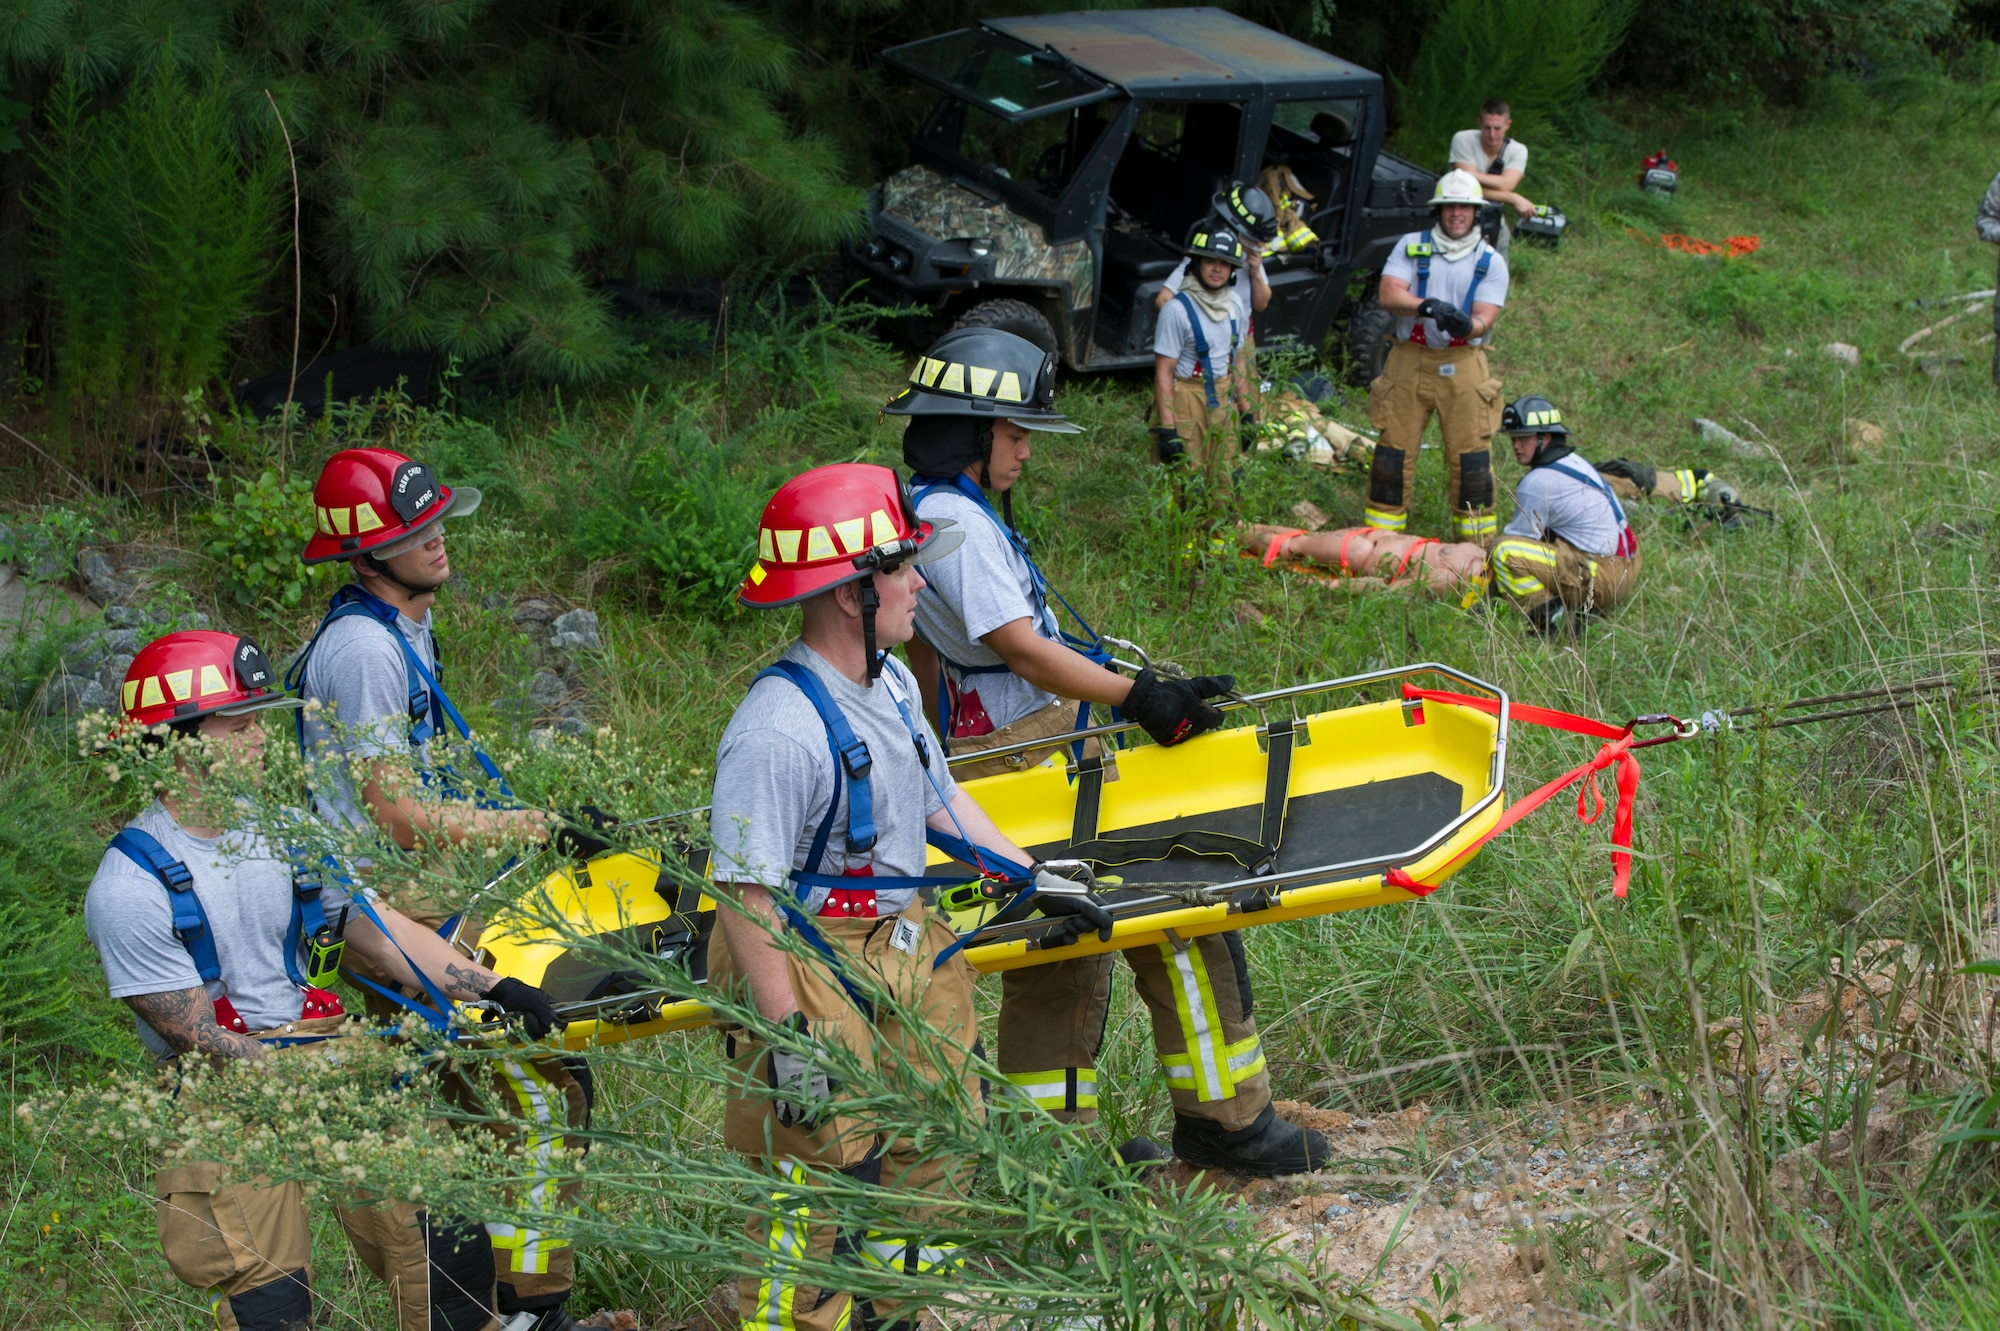 Firefighters with the 446th Civil Engineer Squadron from Joint Base Lewis-McChord, Washington, 514th CES, Joint Base McGuire-Dix-Lakehurst and the 624th CES from Joint Base Pearl Harbor-Hickam, Hawaii, remove a patient from a simulated roll over accident during a low angle rescue operation as a part of Patriot Warrior 2018 at Dobbins Air Reserve Base, Georgia, Aug. 17, 2018. Patriot Warrior is an Air Force Reserve exercise designed to prepare Reserve Citizen Airmen for world-wide deployments and provides knowledge and experience to strengthen home station training programs. (U.S. Air Force photo by Master Sgt. Theanne Herrmann)